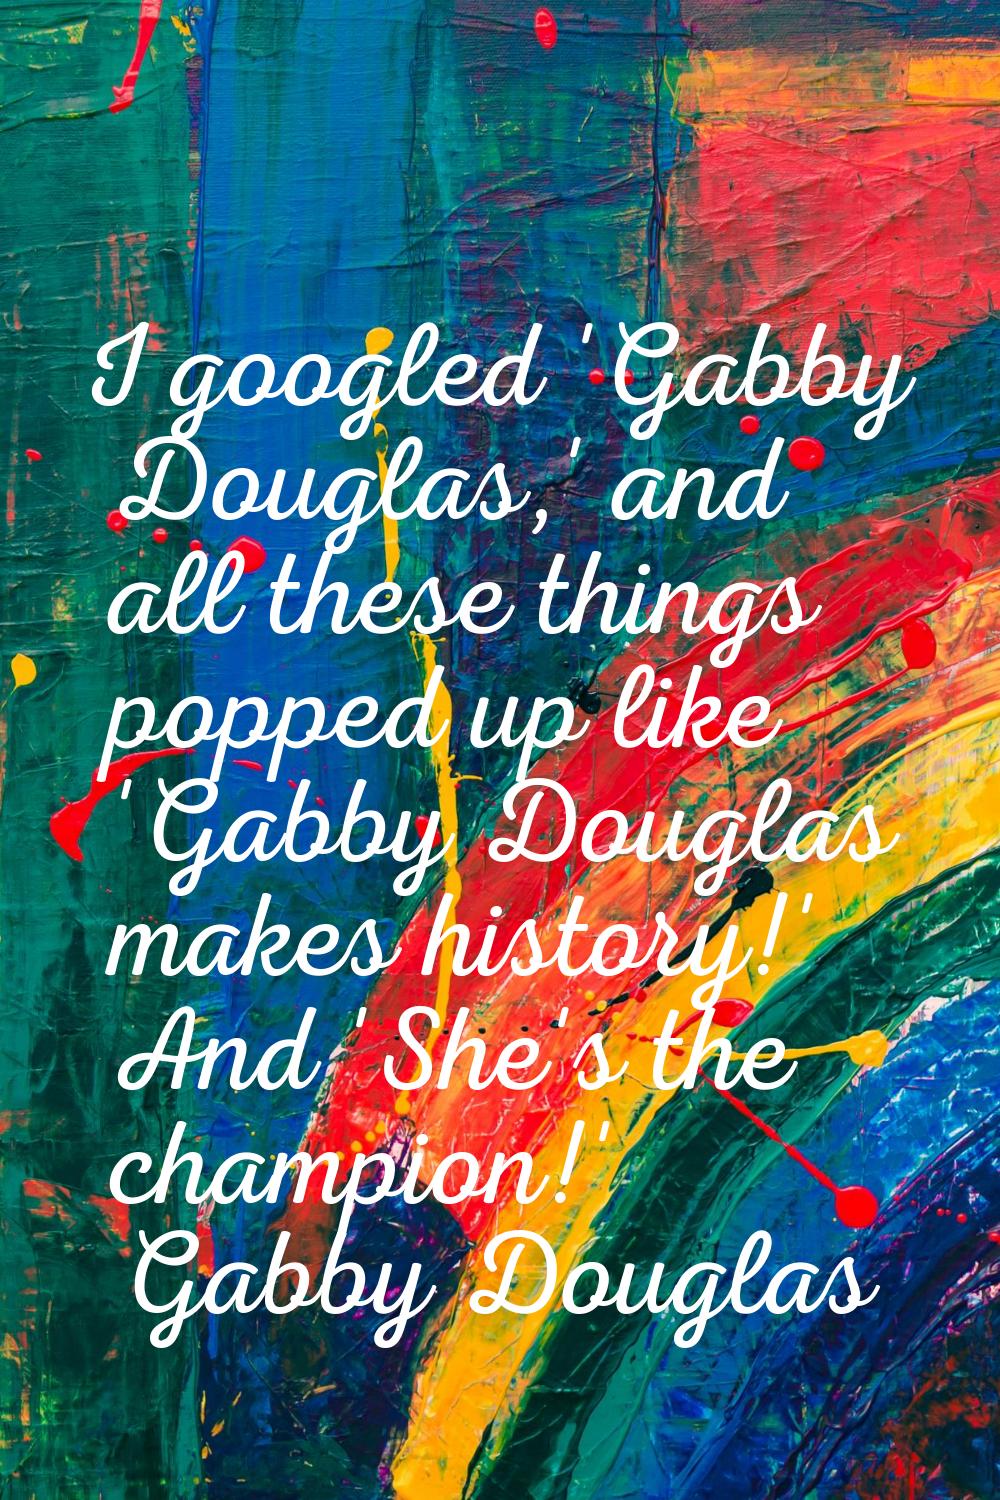 I googled 'Gabby Douglas,' and all these things popped up like 'Gabby Douglas makes history!' And '